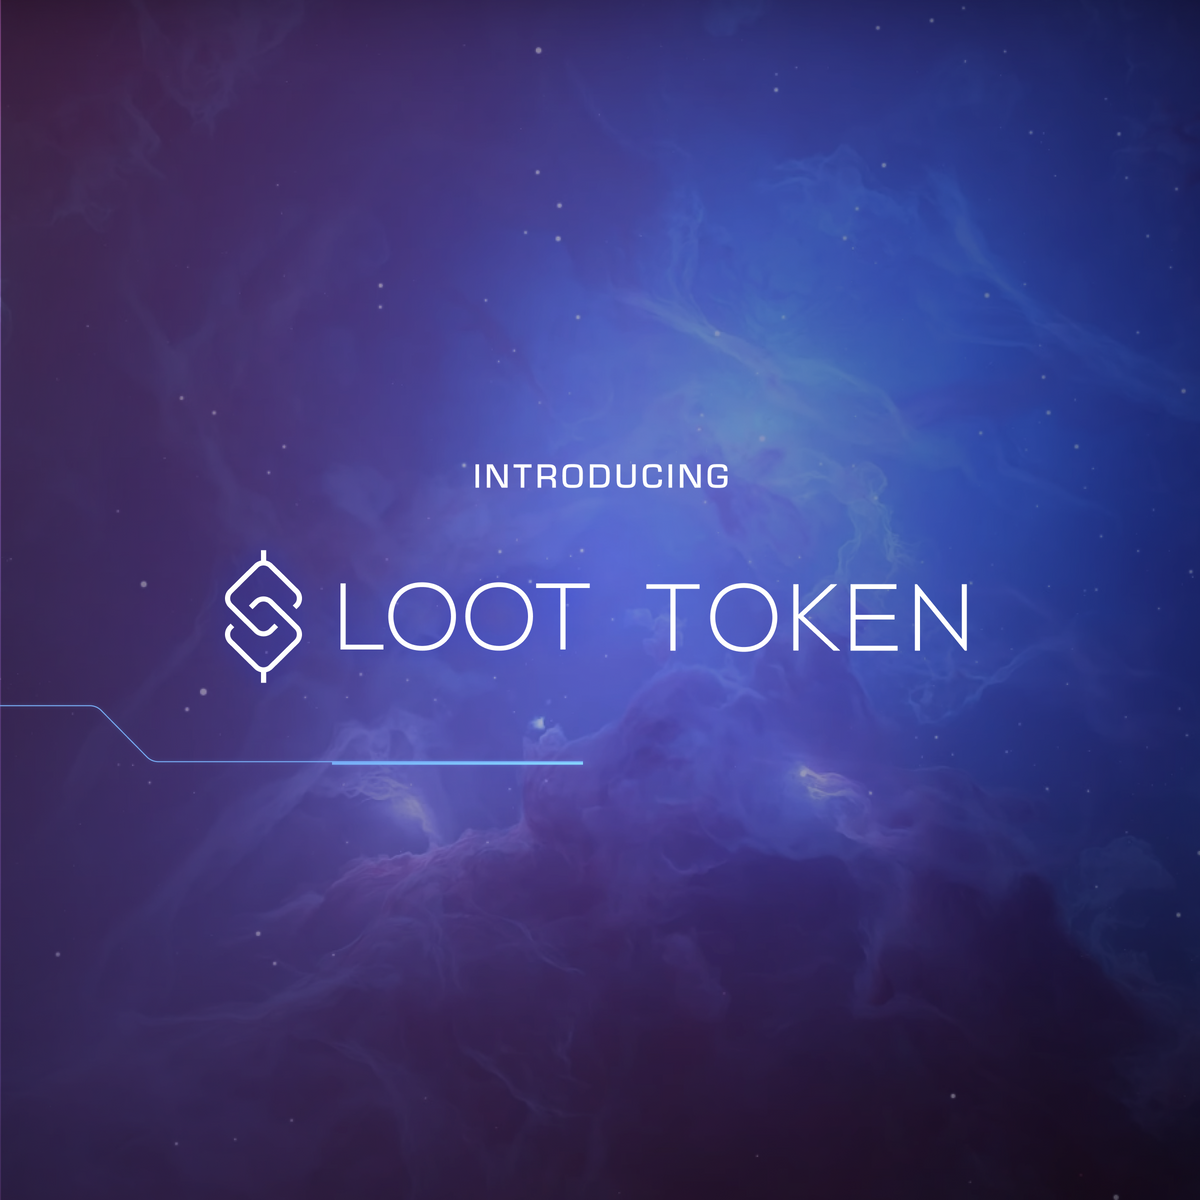 Introducing $LOOT Token, a treasury reserve for the Wilder Artist Guild & Metaverse Economy